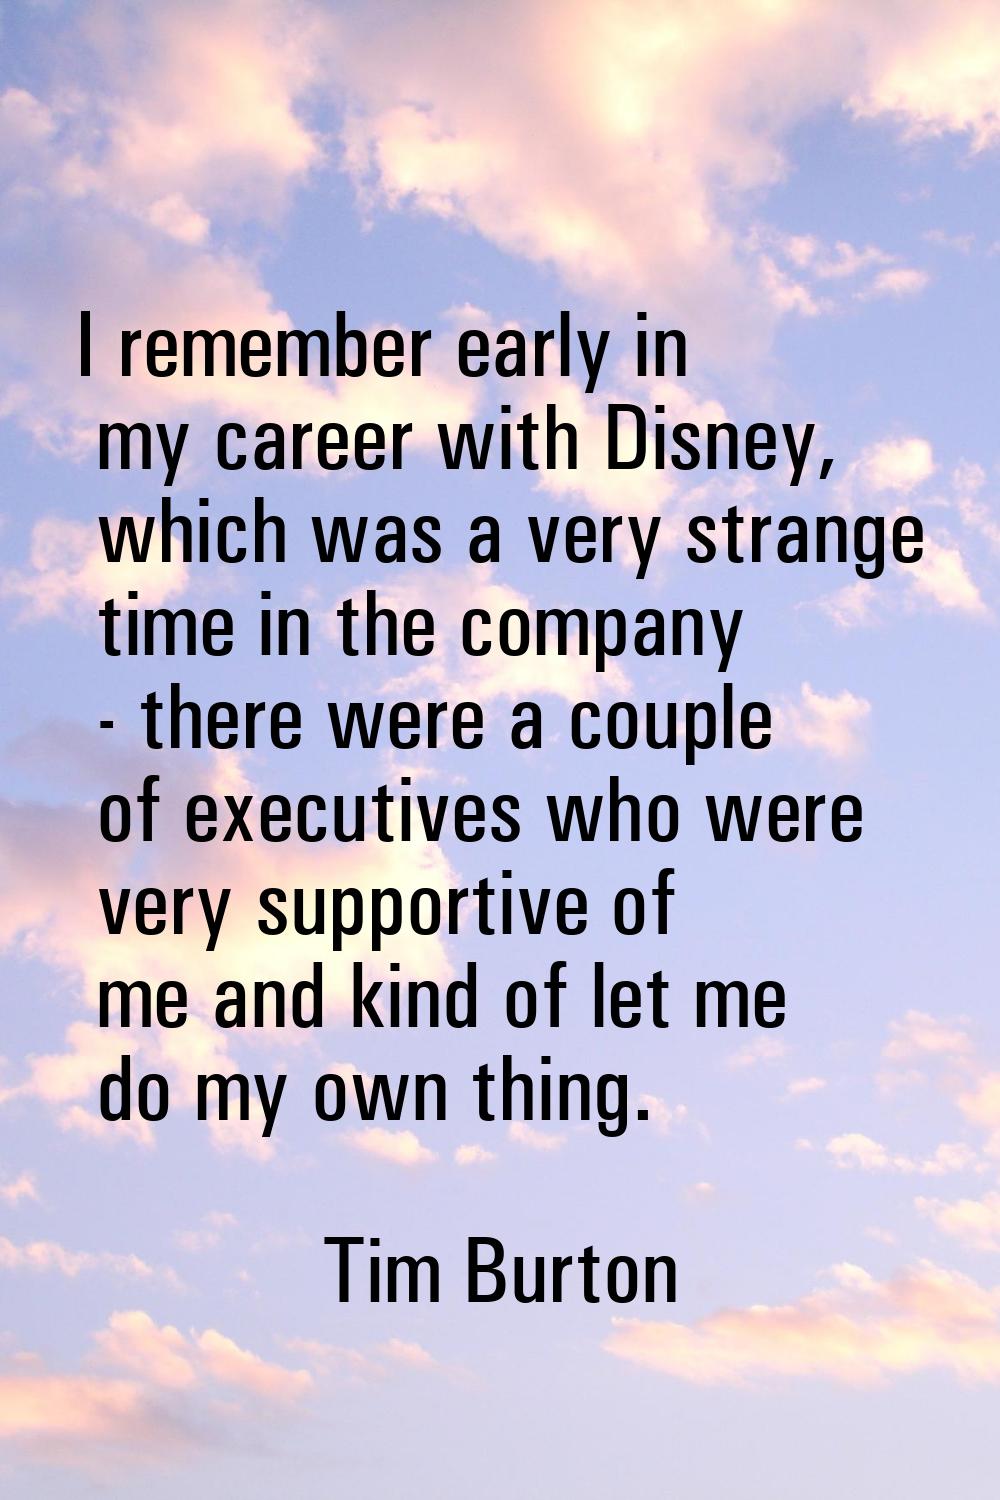 I remember early in my career with Disney, which was a very strange time in the company - there wer